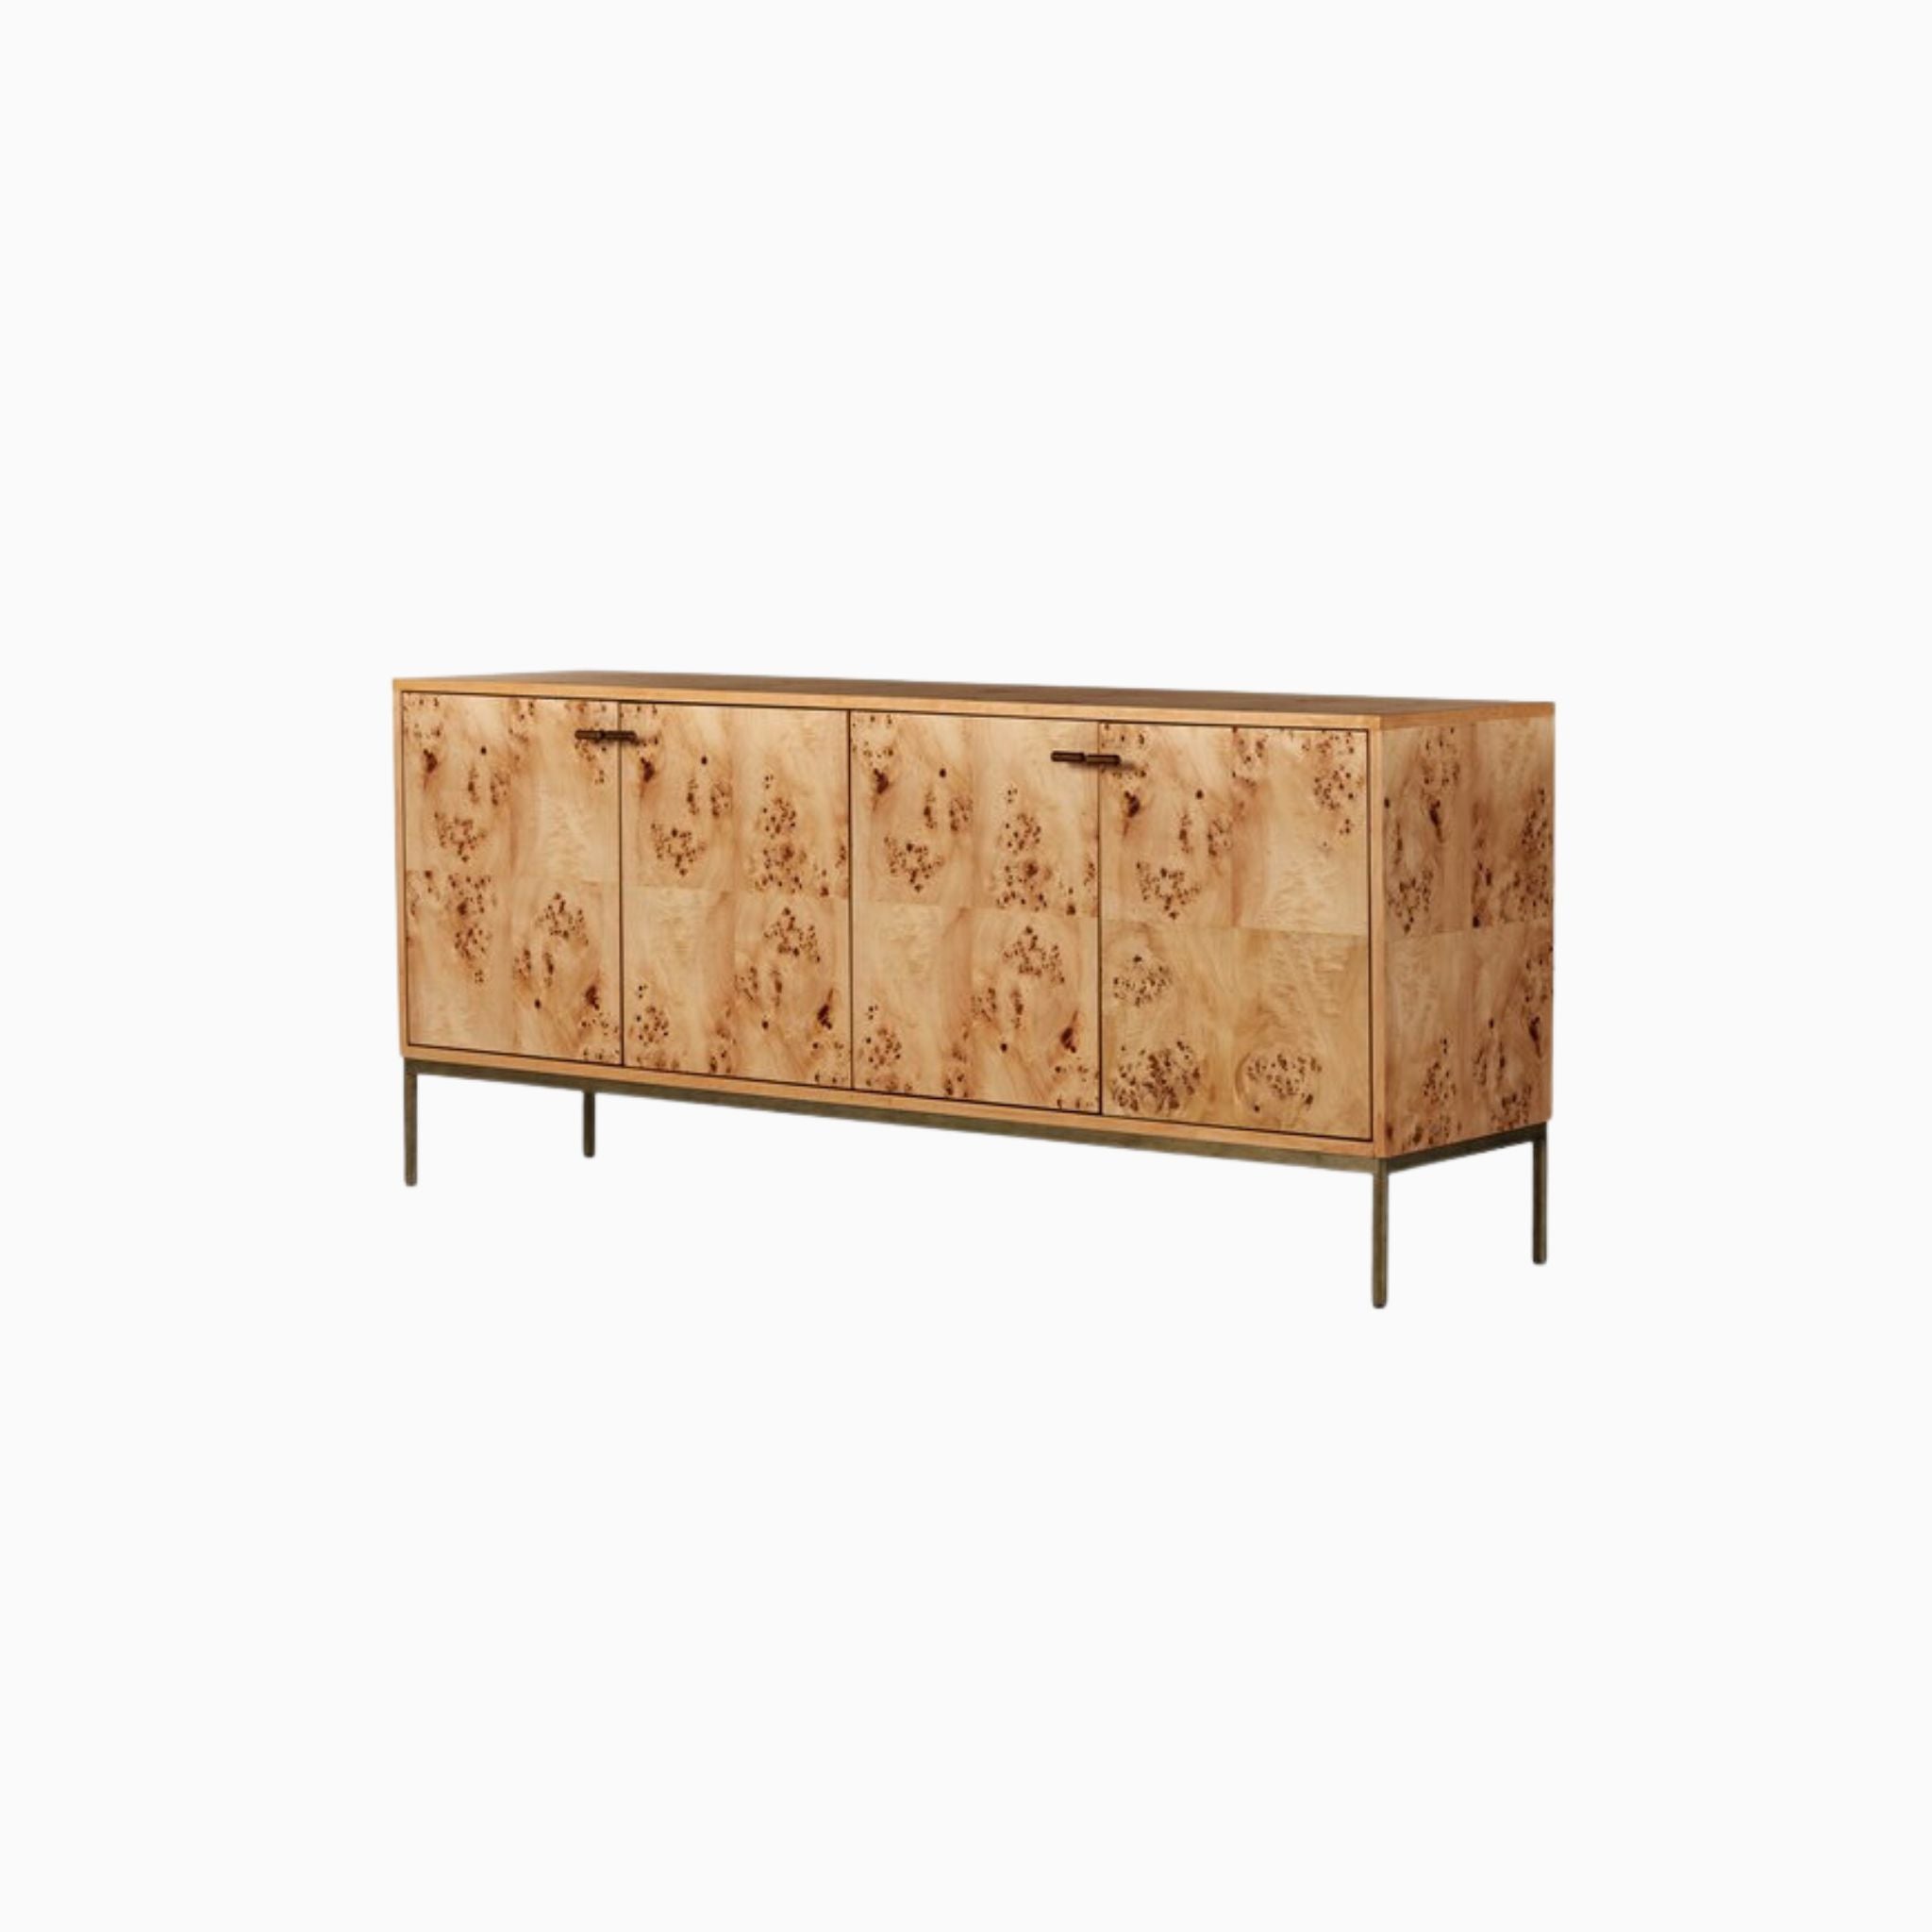 MITZIE SIDEBOARD - Simply Elevated Home Furnishings 